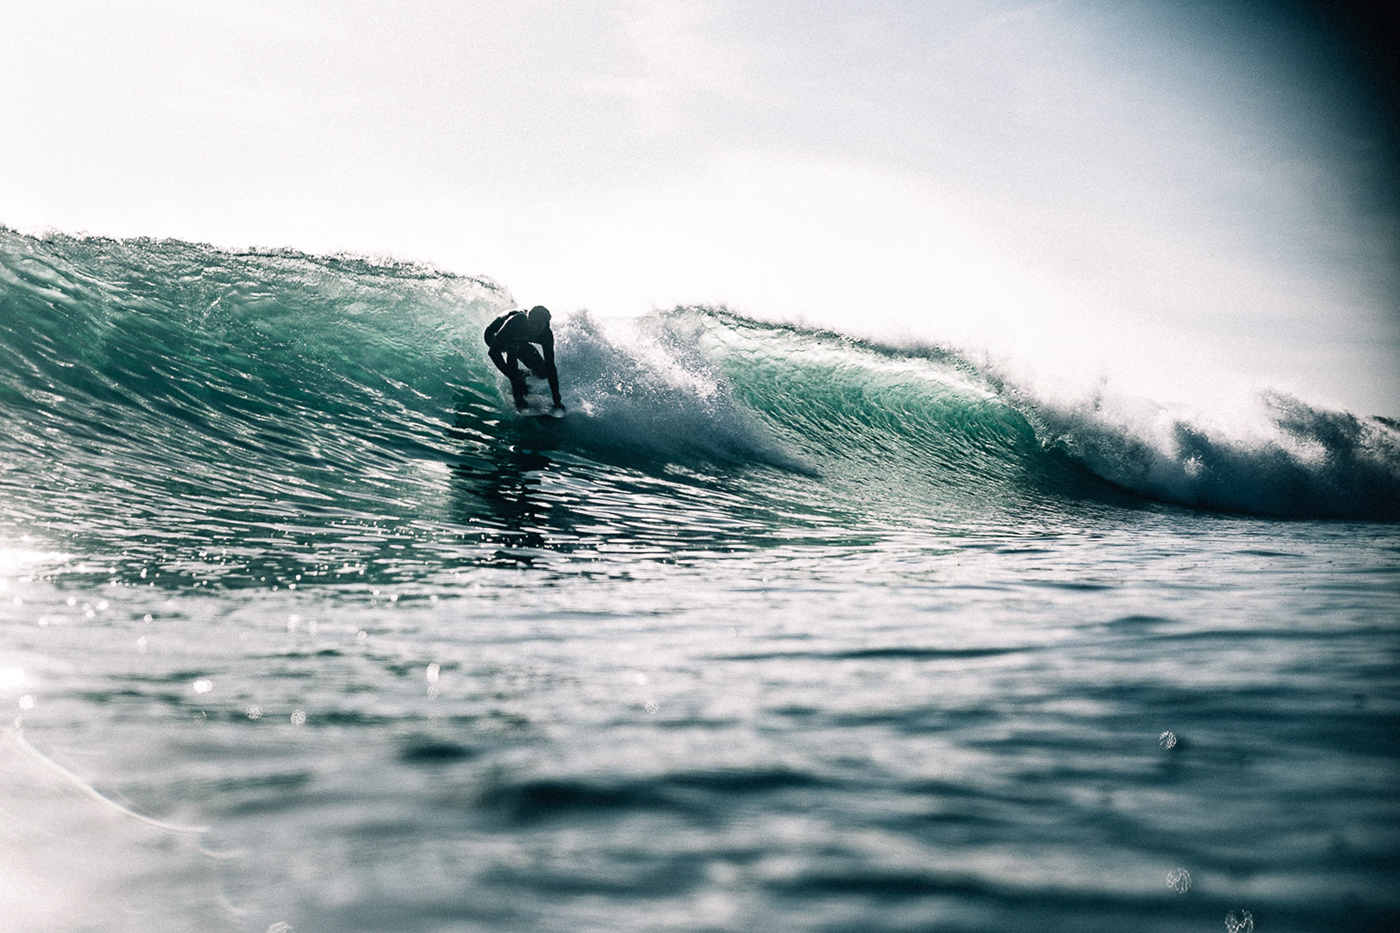 surfing lifestyle dicapac nicaragua surfer Ocean Canon sigma underwater Travel